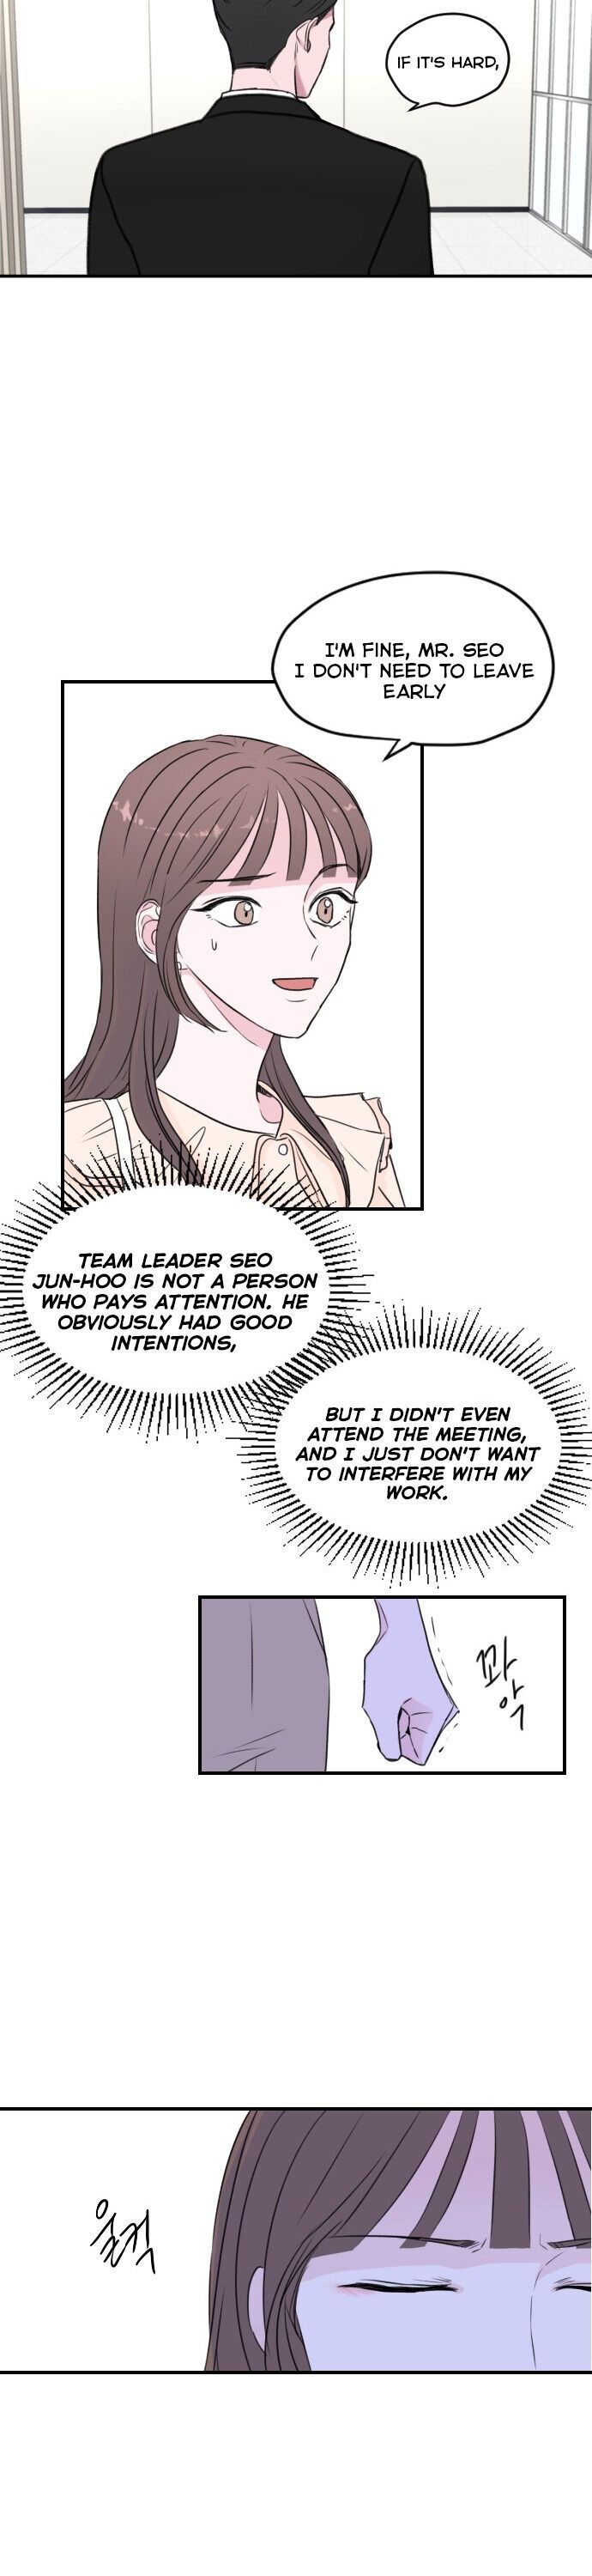 Office Marriage, After a Breakup Chapter 1 - Page 30